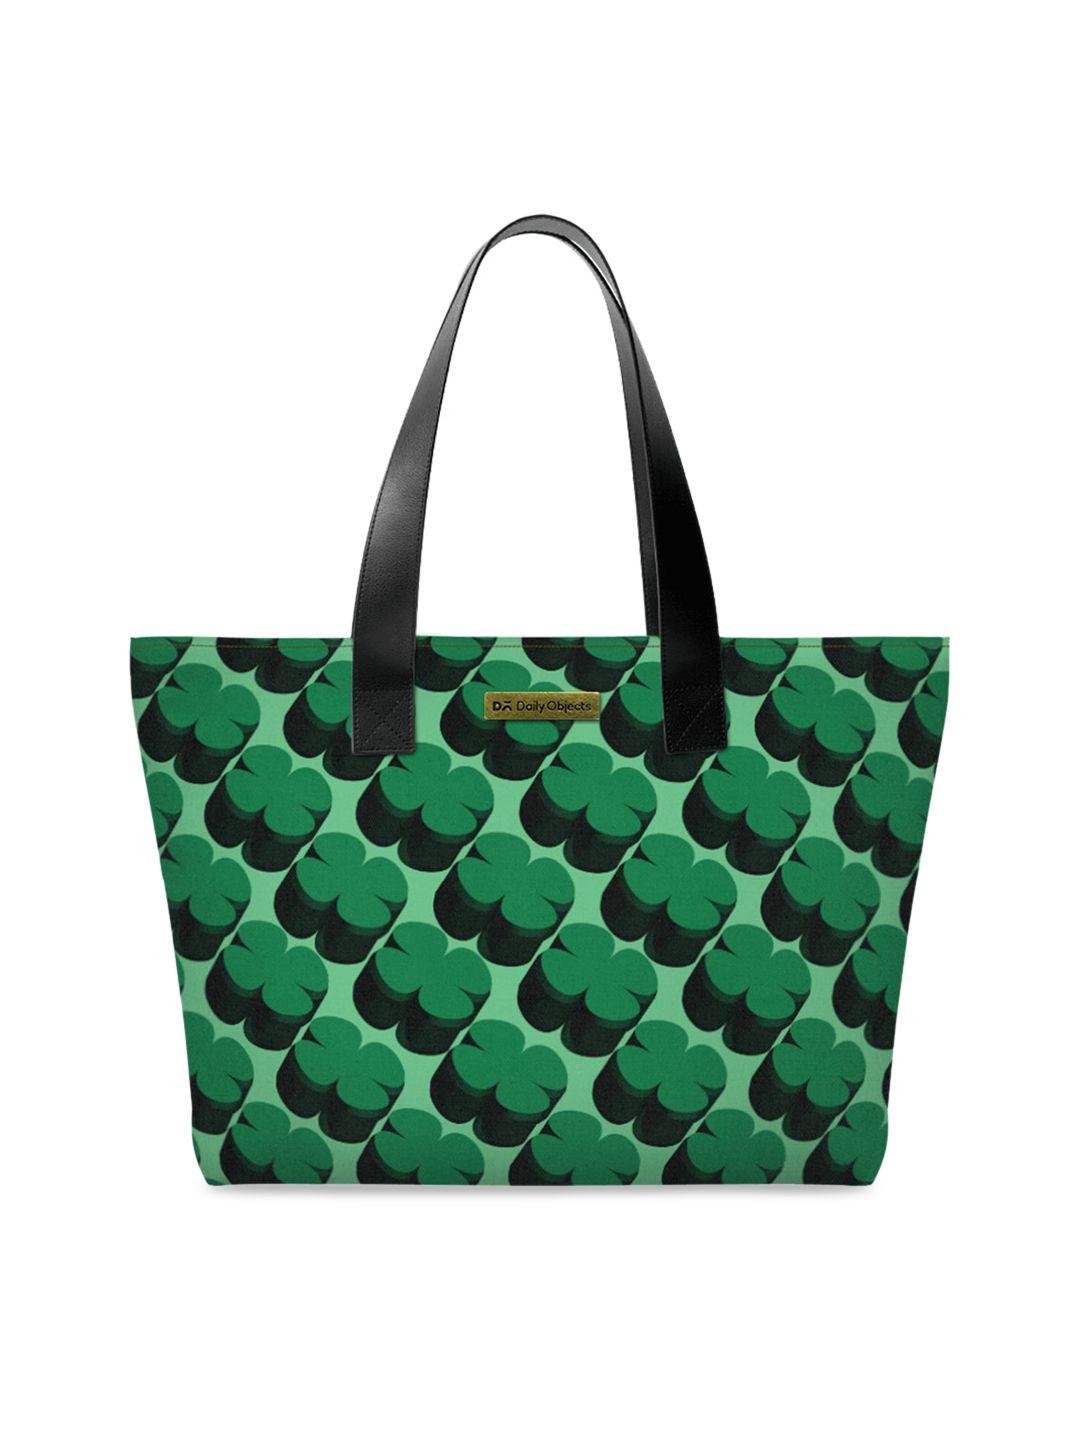 dailyobjects multicoloured geometric printed oversized shopper tote bag